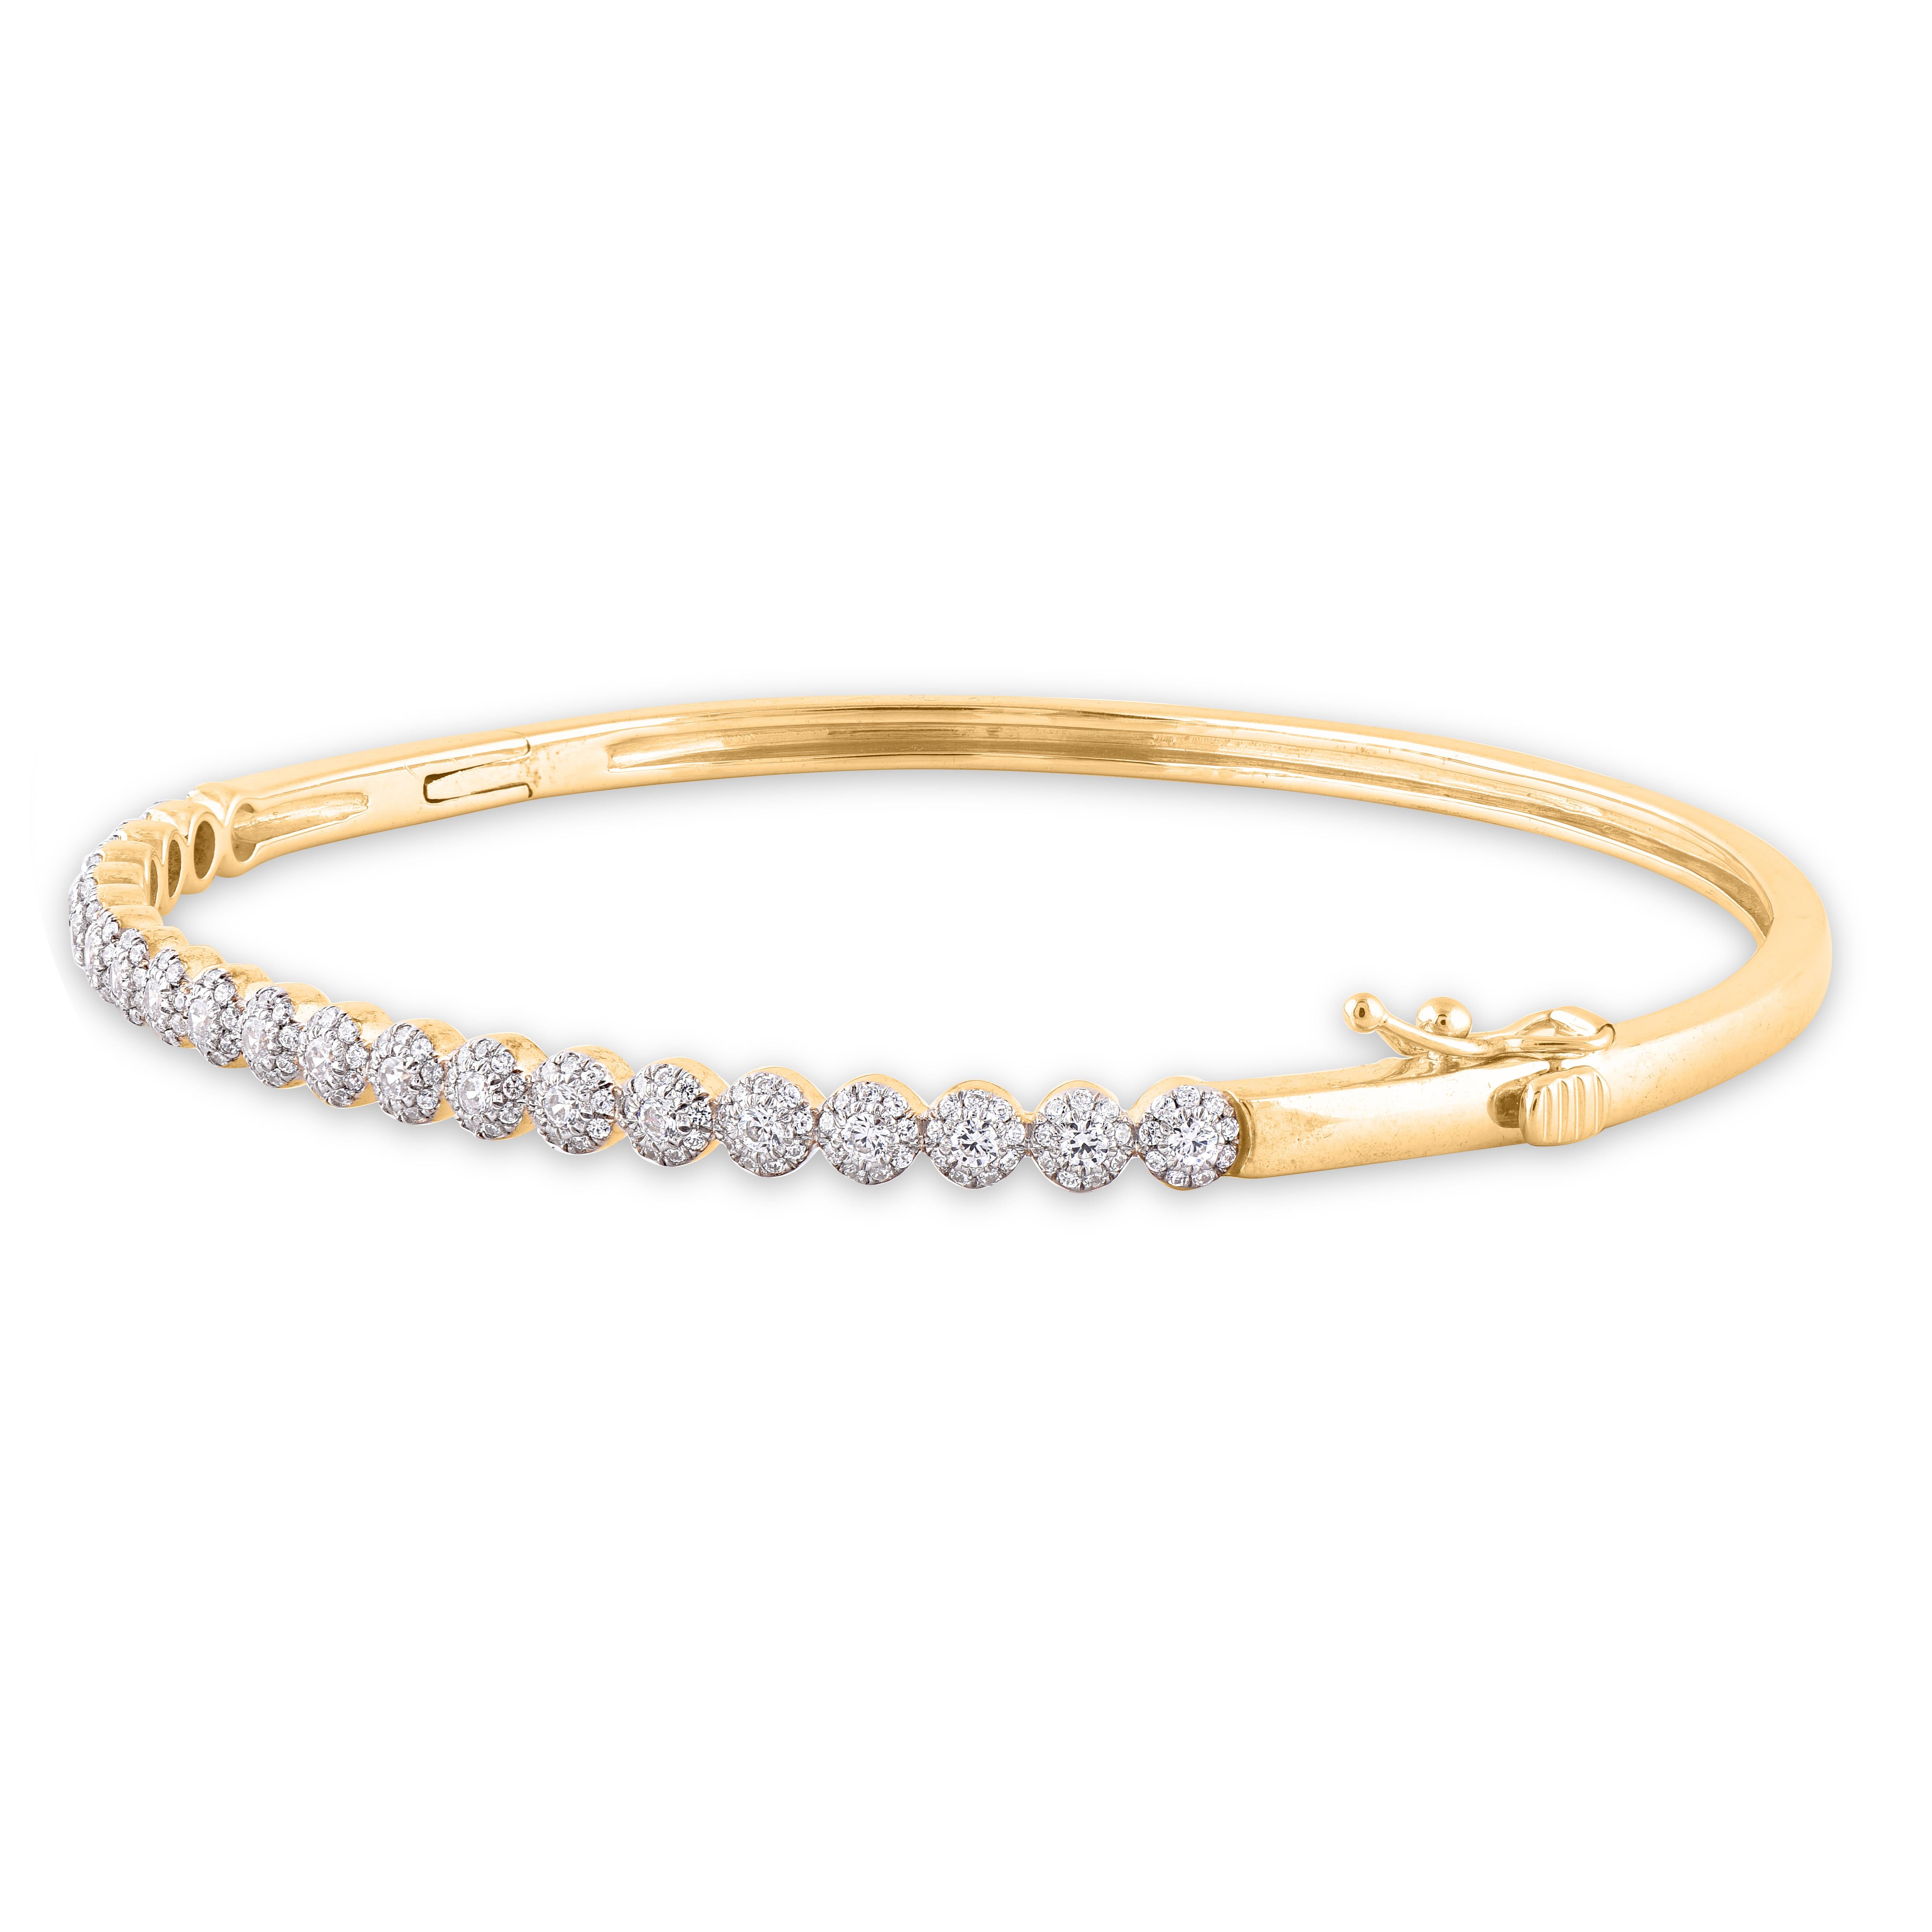 Experience the luxury and sophistication of this diamond frame tennis bangle. Made by our skillful craftsmen in 14 Karat White Gold and studded with 210 round brilliant-cut diamond set in micro-prong setting. The total weight of diamond is 1.00